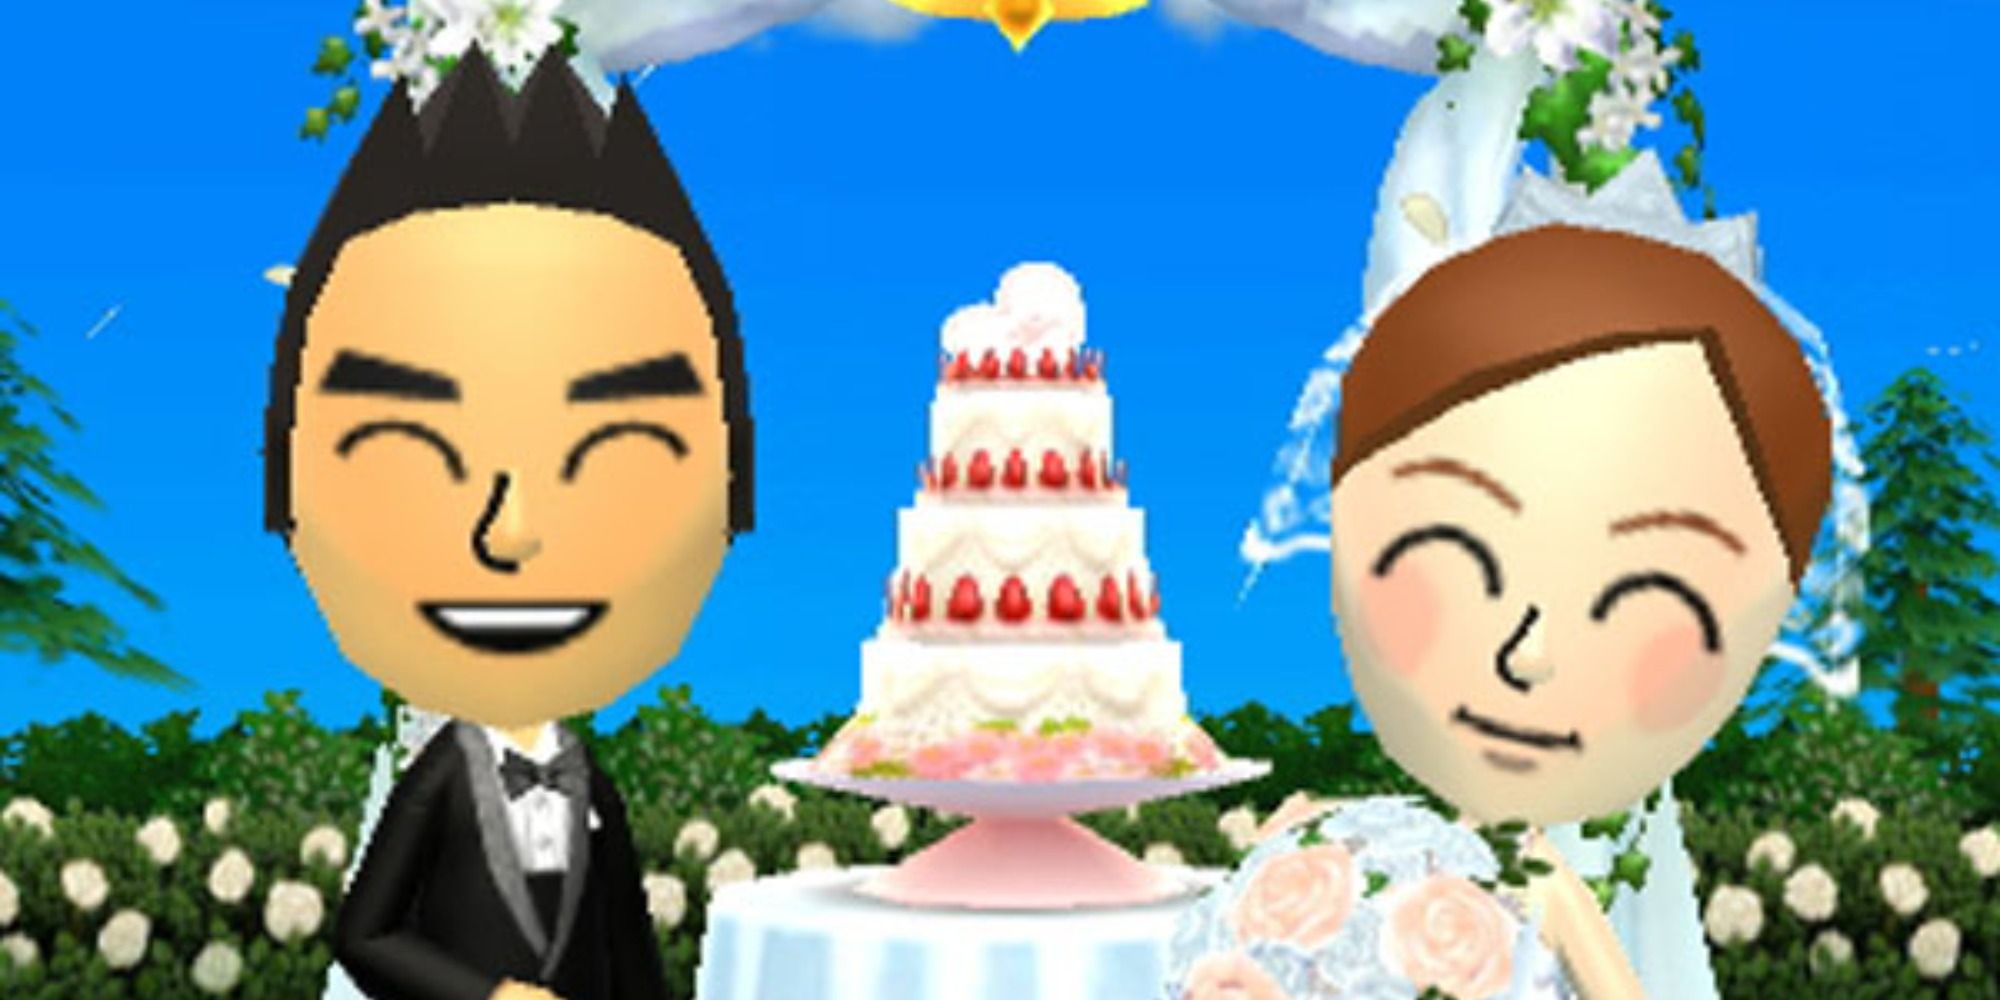 A bride and groom smiling at the camera in front of their wedding cake